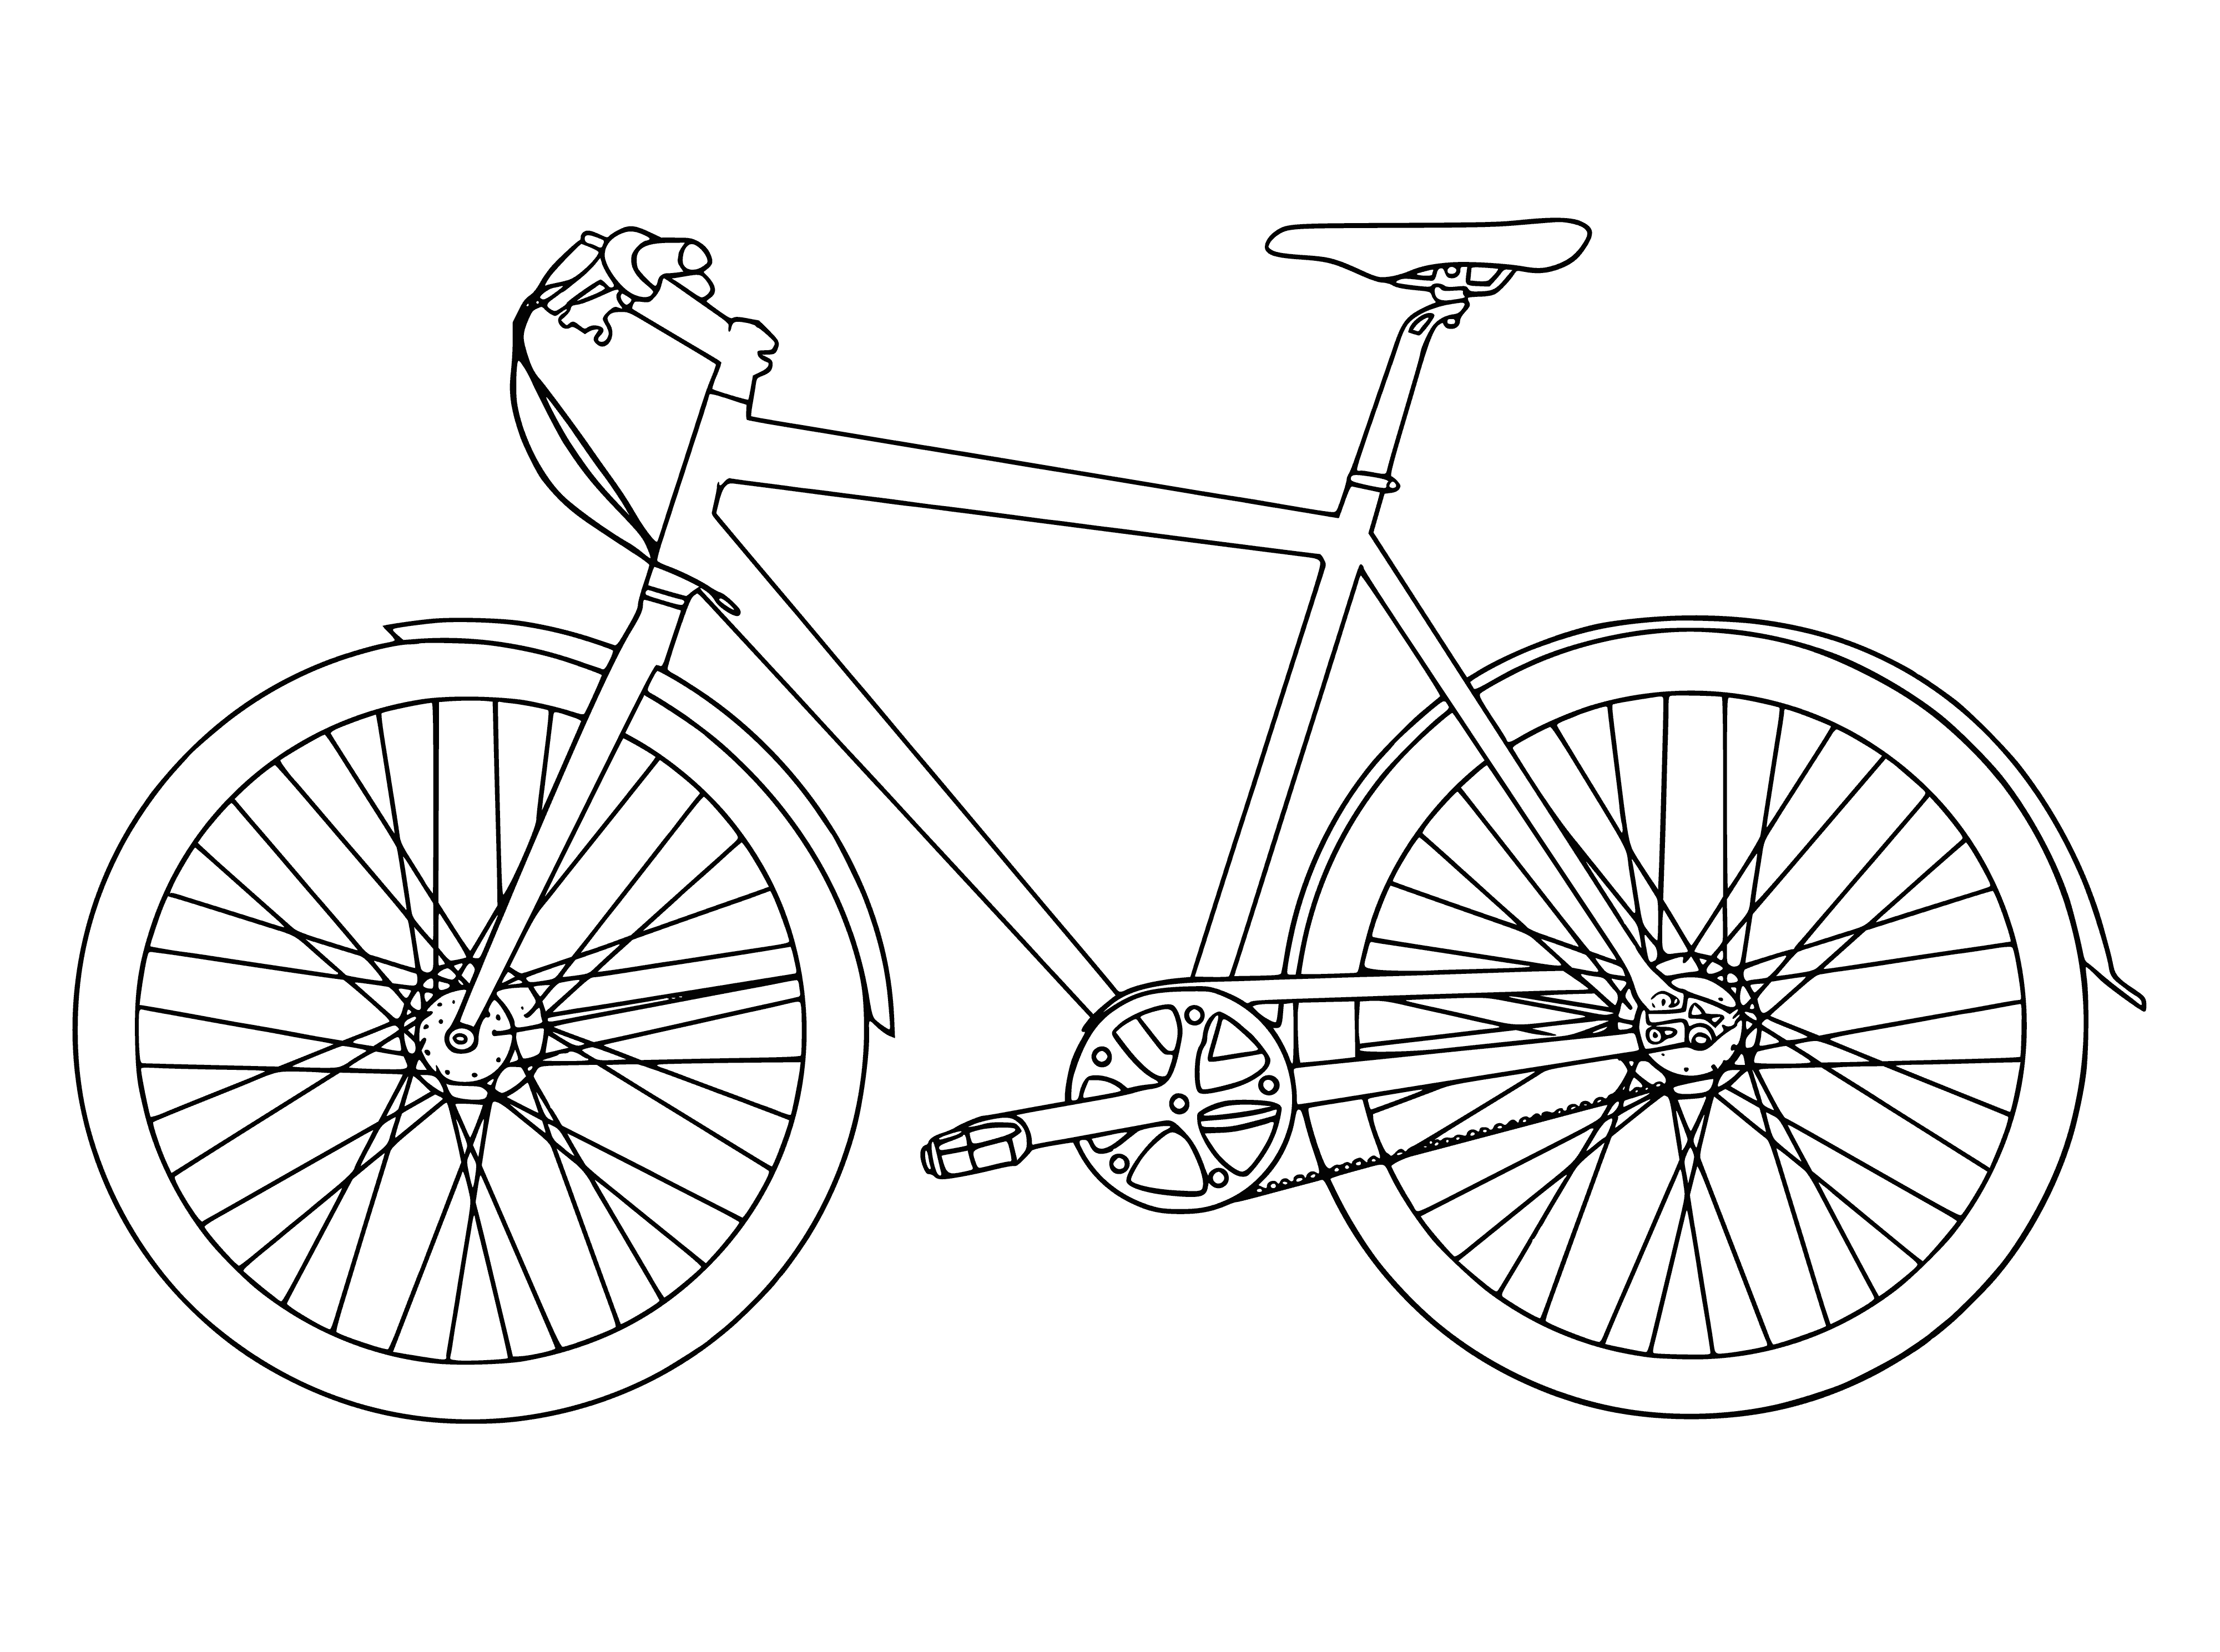 coloring page: A black and silver bike with two wheels and a seat. You make it move by pedaling.